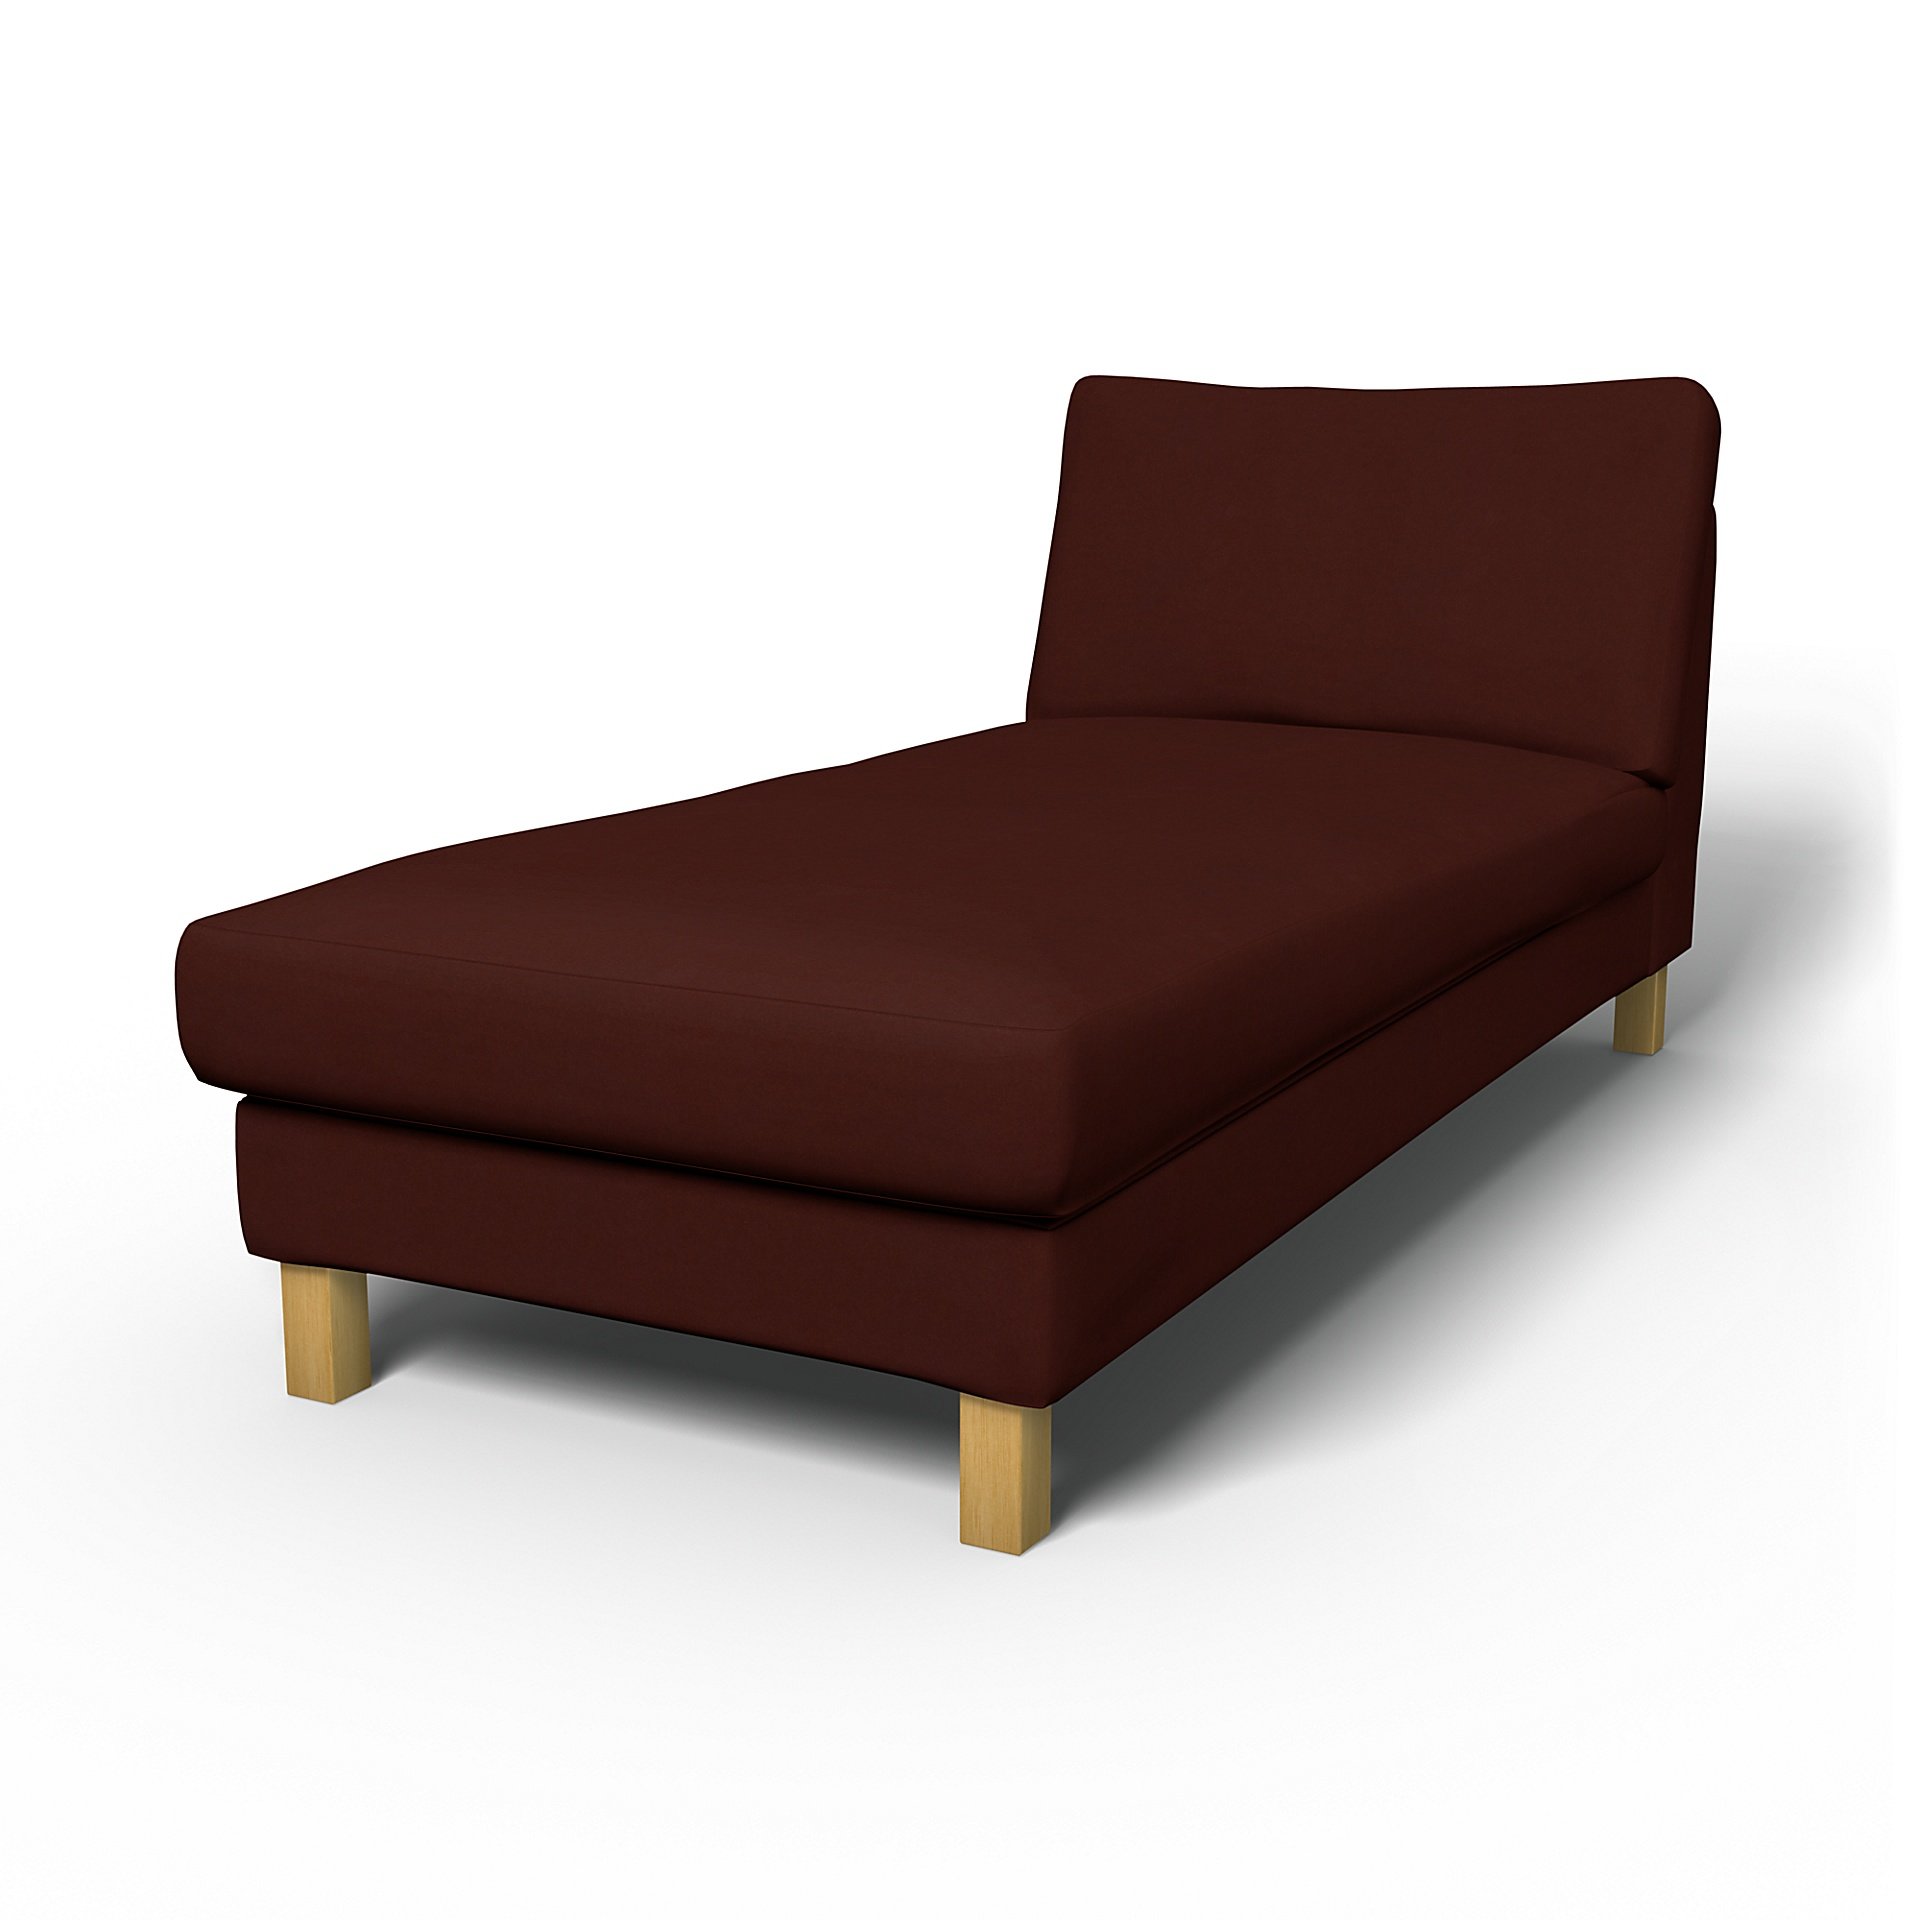 IKEA - Karlstad Stand Alone Chaise Longue Cover, Ground Coffee, Velvet - Bemz